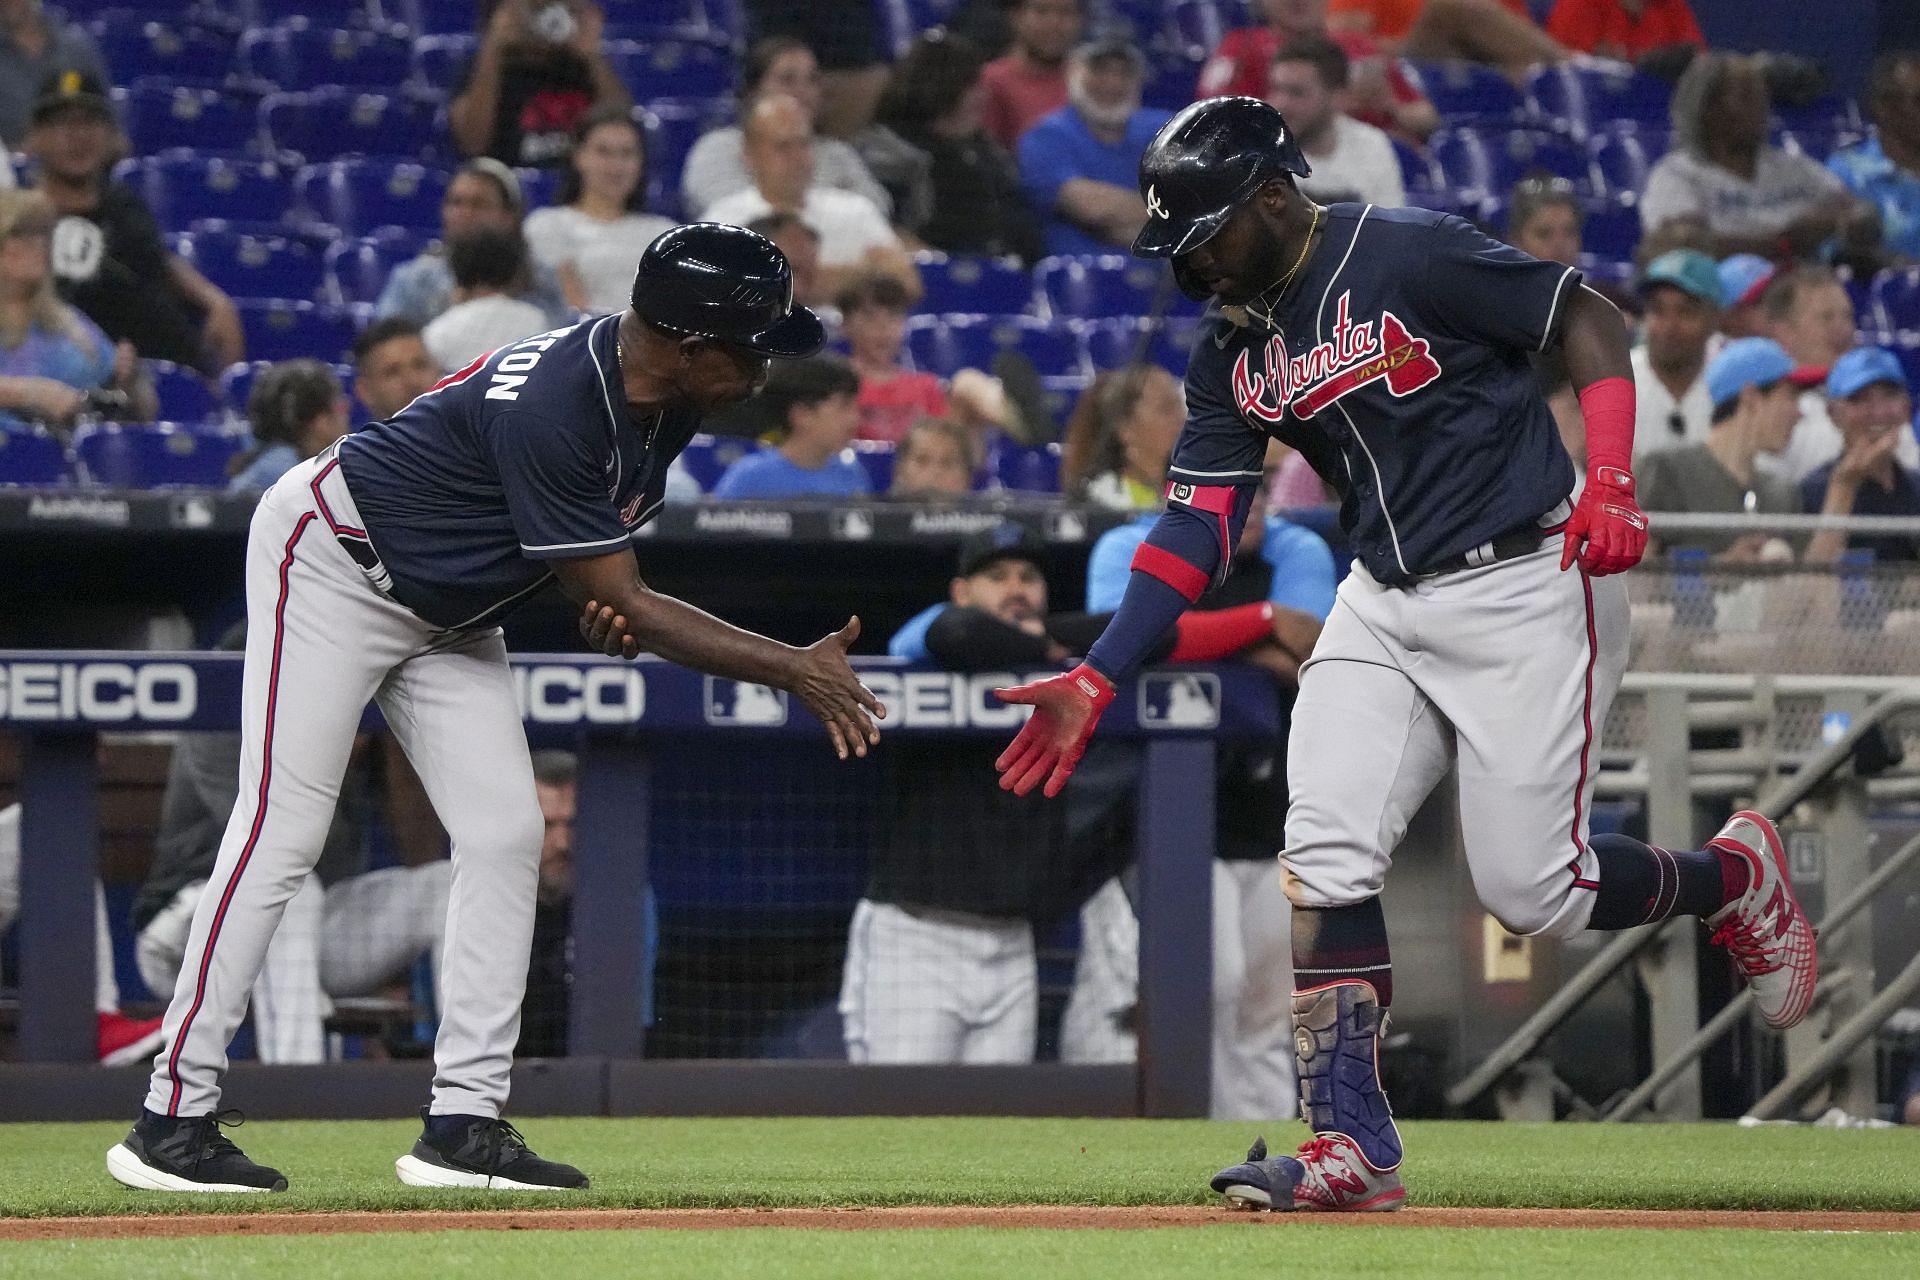 Michael Harris rounds third after a ninth-inning home run against the Miami Marlins.